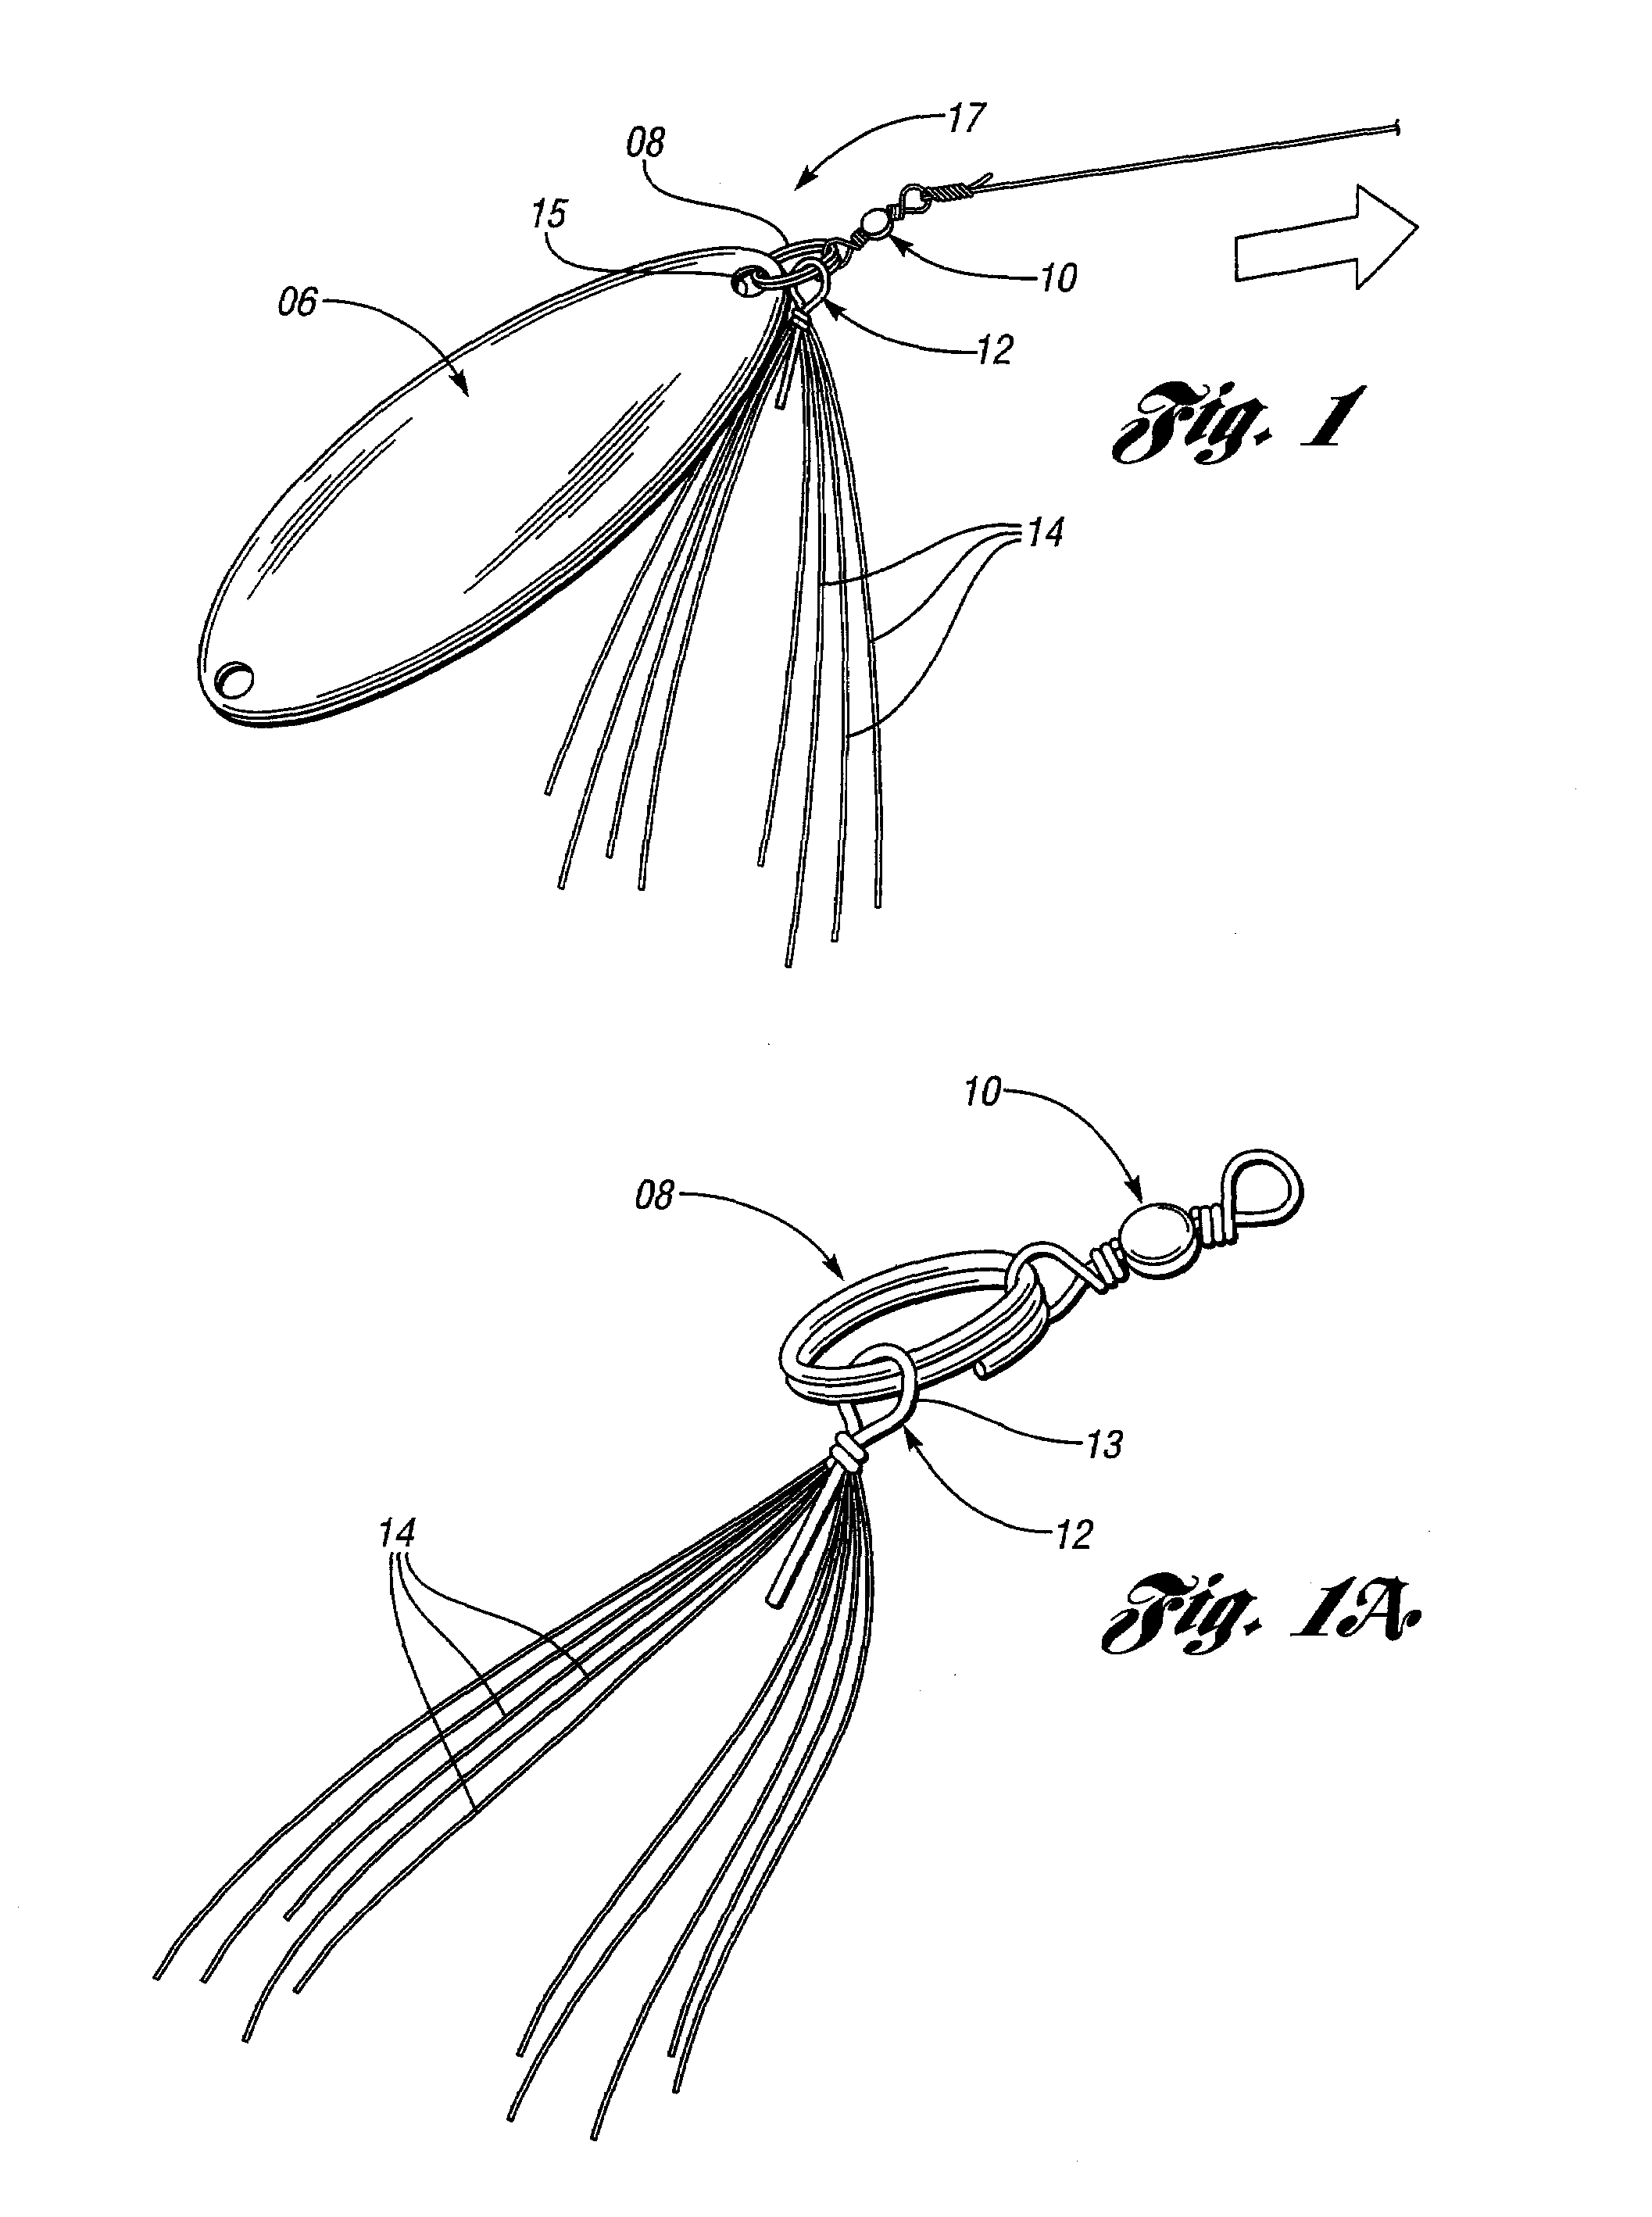 Fiber attractor and attachment apparatus for increasing the attracting tendencies of fishing lures